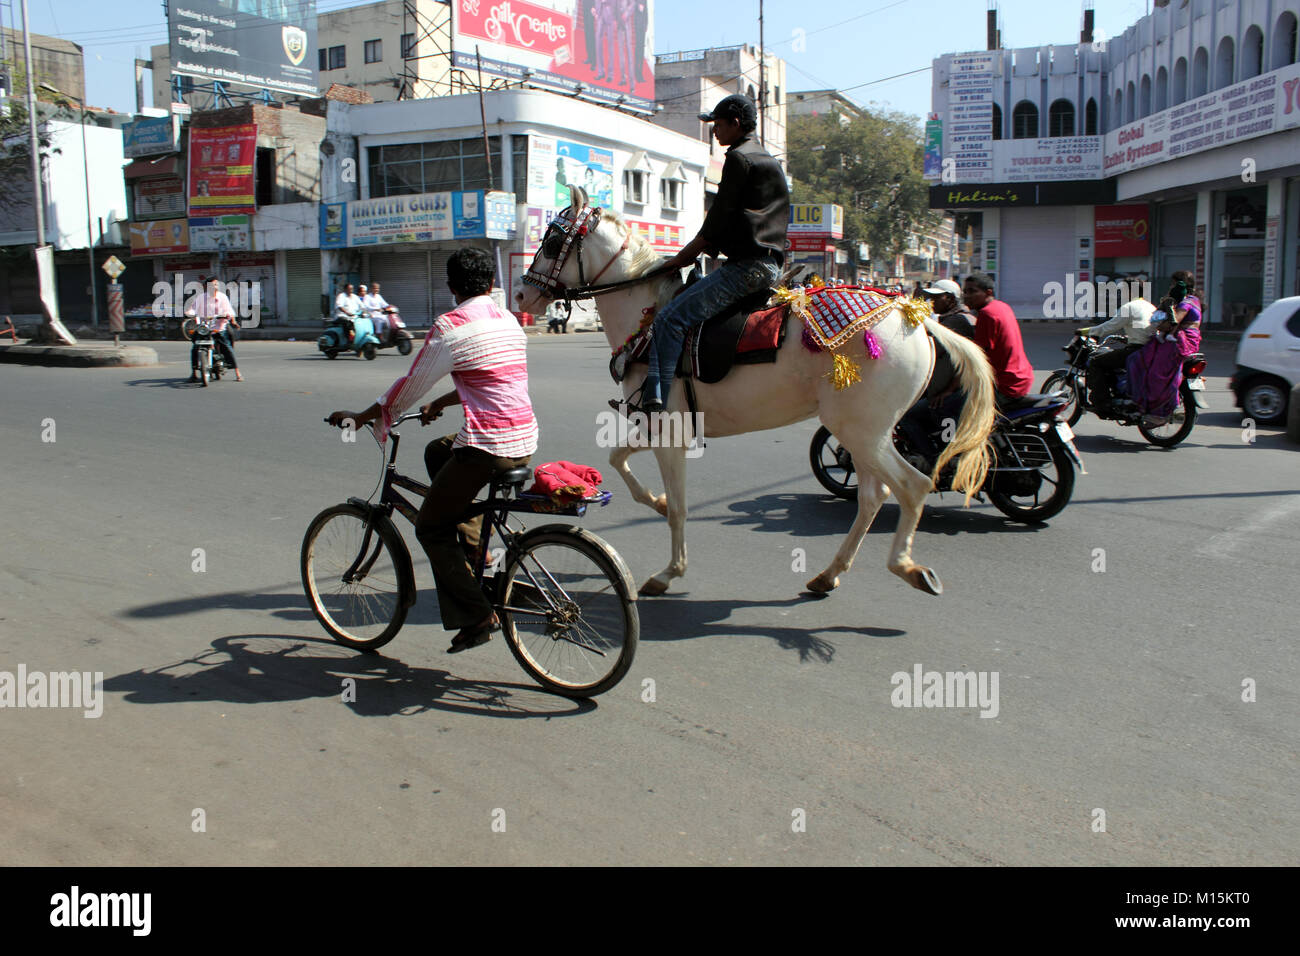 Indian man riding horse on busy street in Hyderabad India Stock Photo